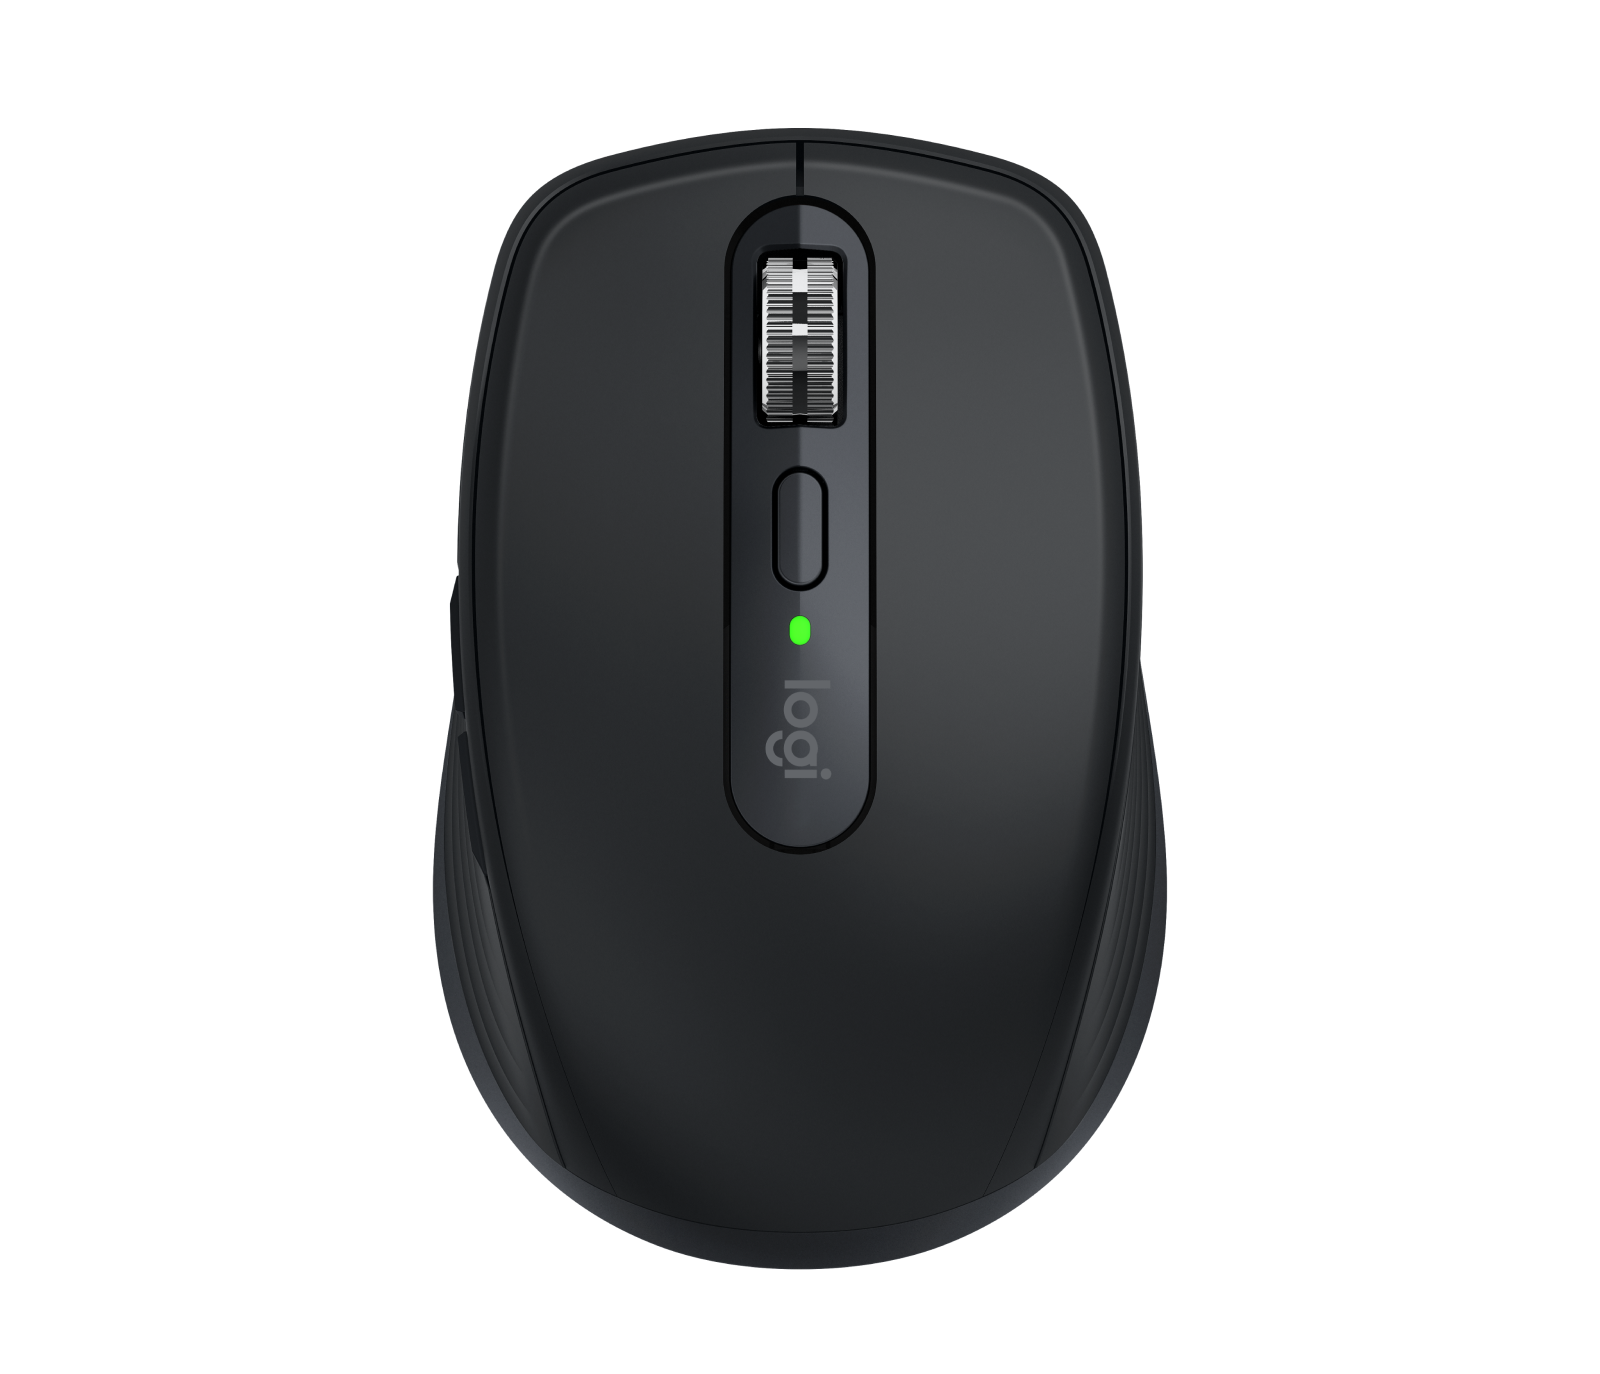  Logitech MX Anywhere 3 Compact Performance Mouse, Wireless,  Comfort, Fast Scrolling, Any Surface, Portable, 4000DPI, Customizable  Buttons, USB-C, Bluetooth - Graphite (Renewed)